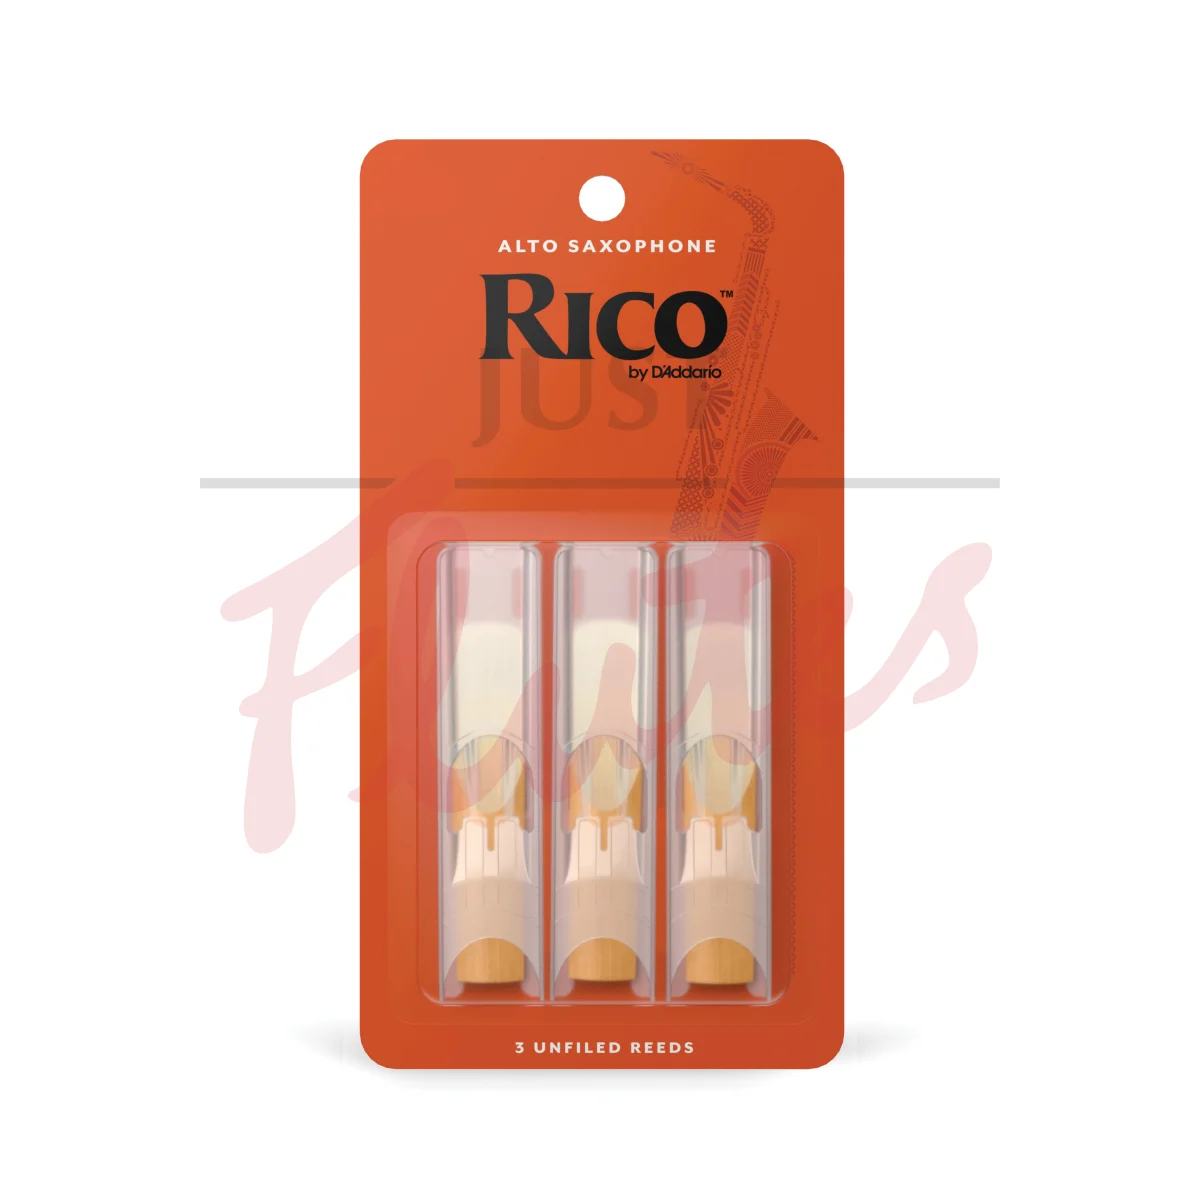 Rico by D'Addario RJA0325 Alto Saxophone Reeds, Strength 2.5, Pack of 3